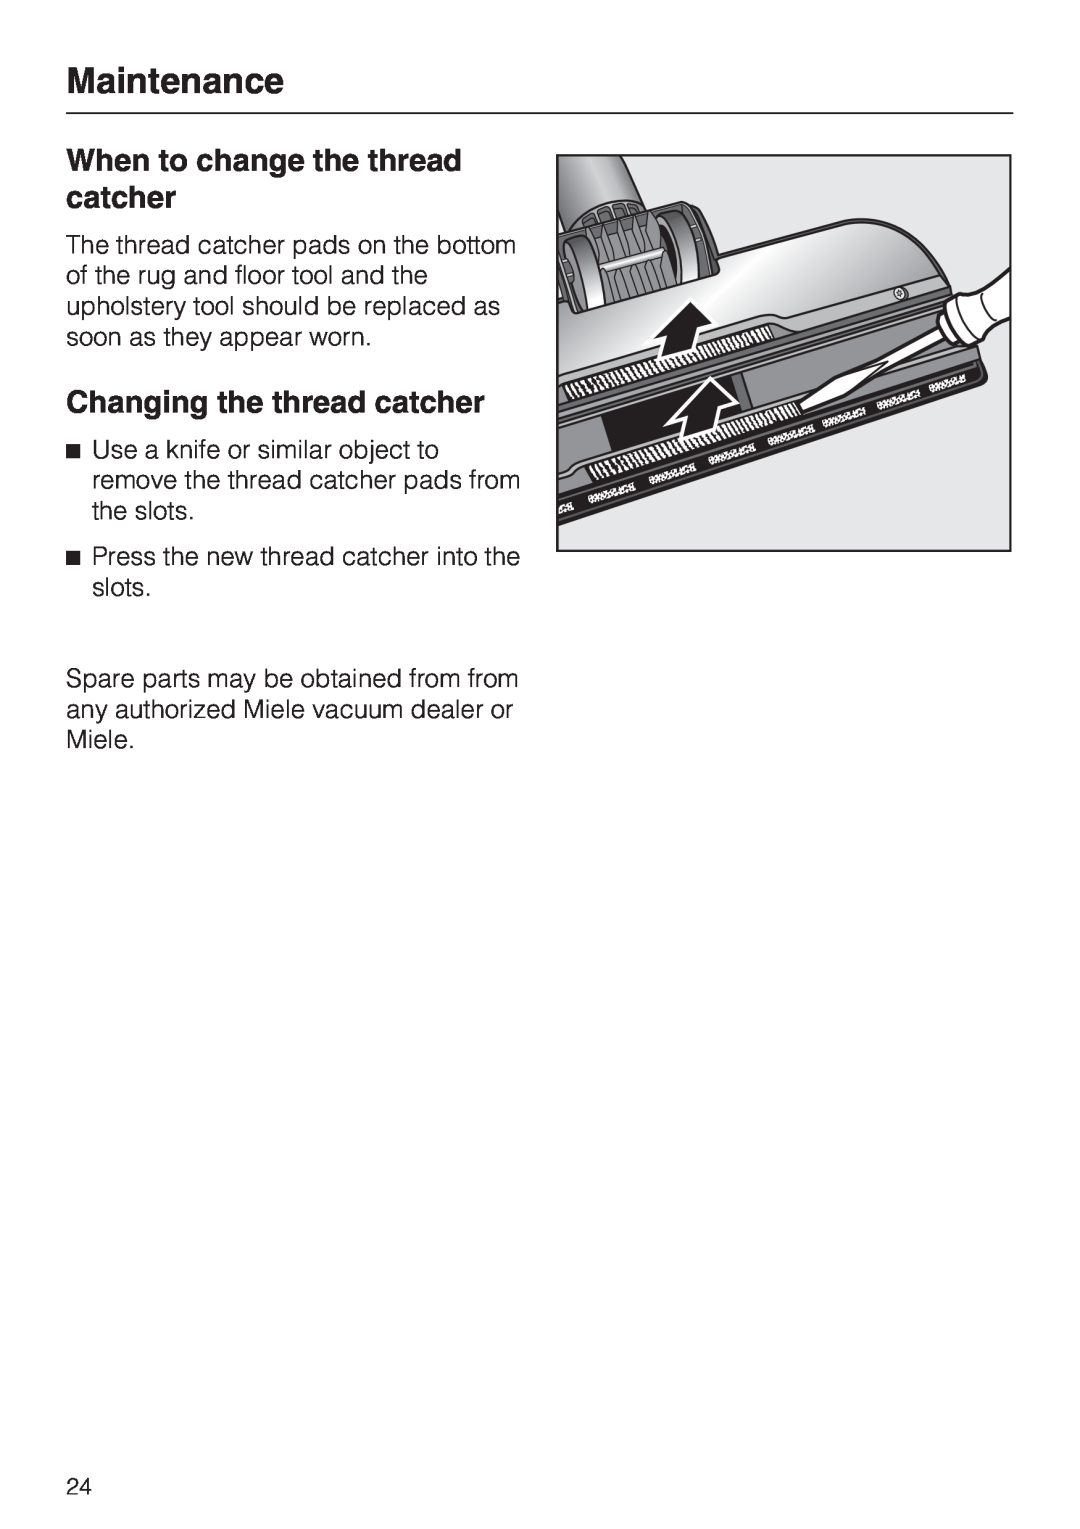 Miele S 190 operating instructions When to change the thread catcher, Changing the thread catcher, Maintenance 